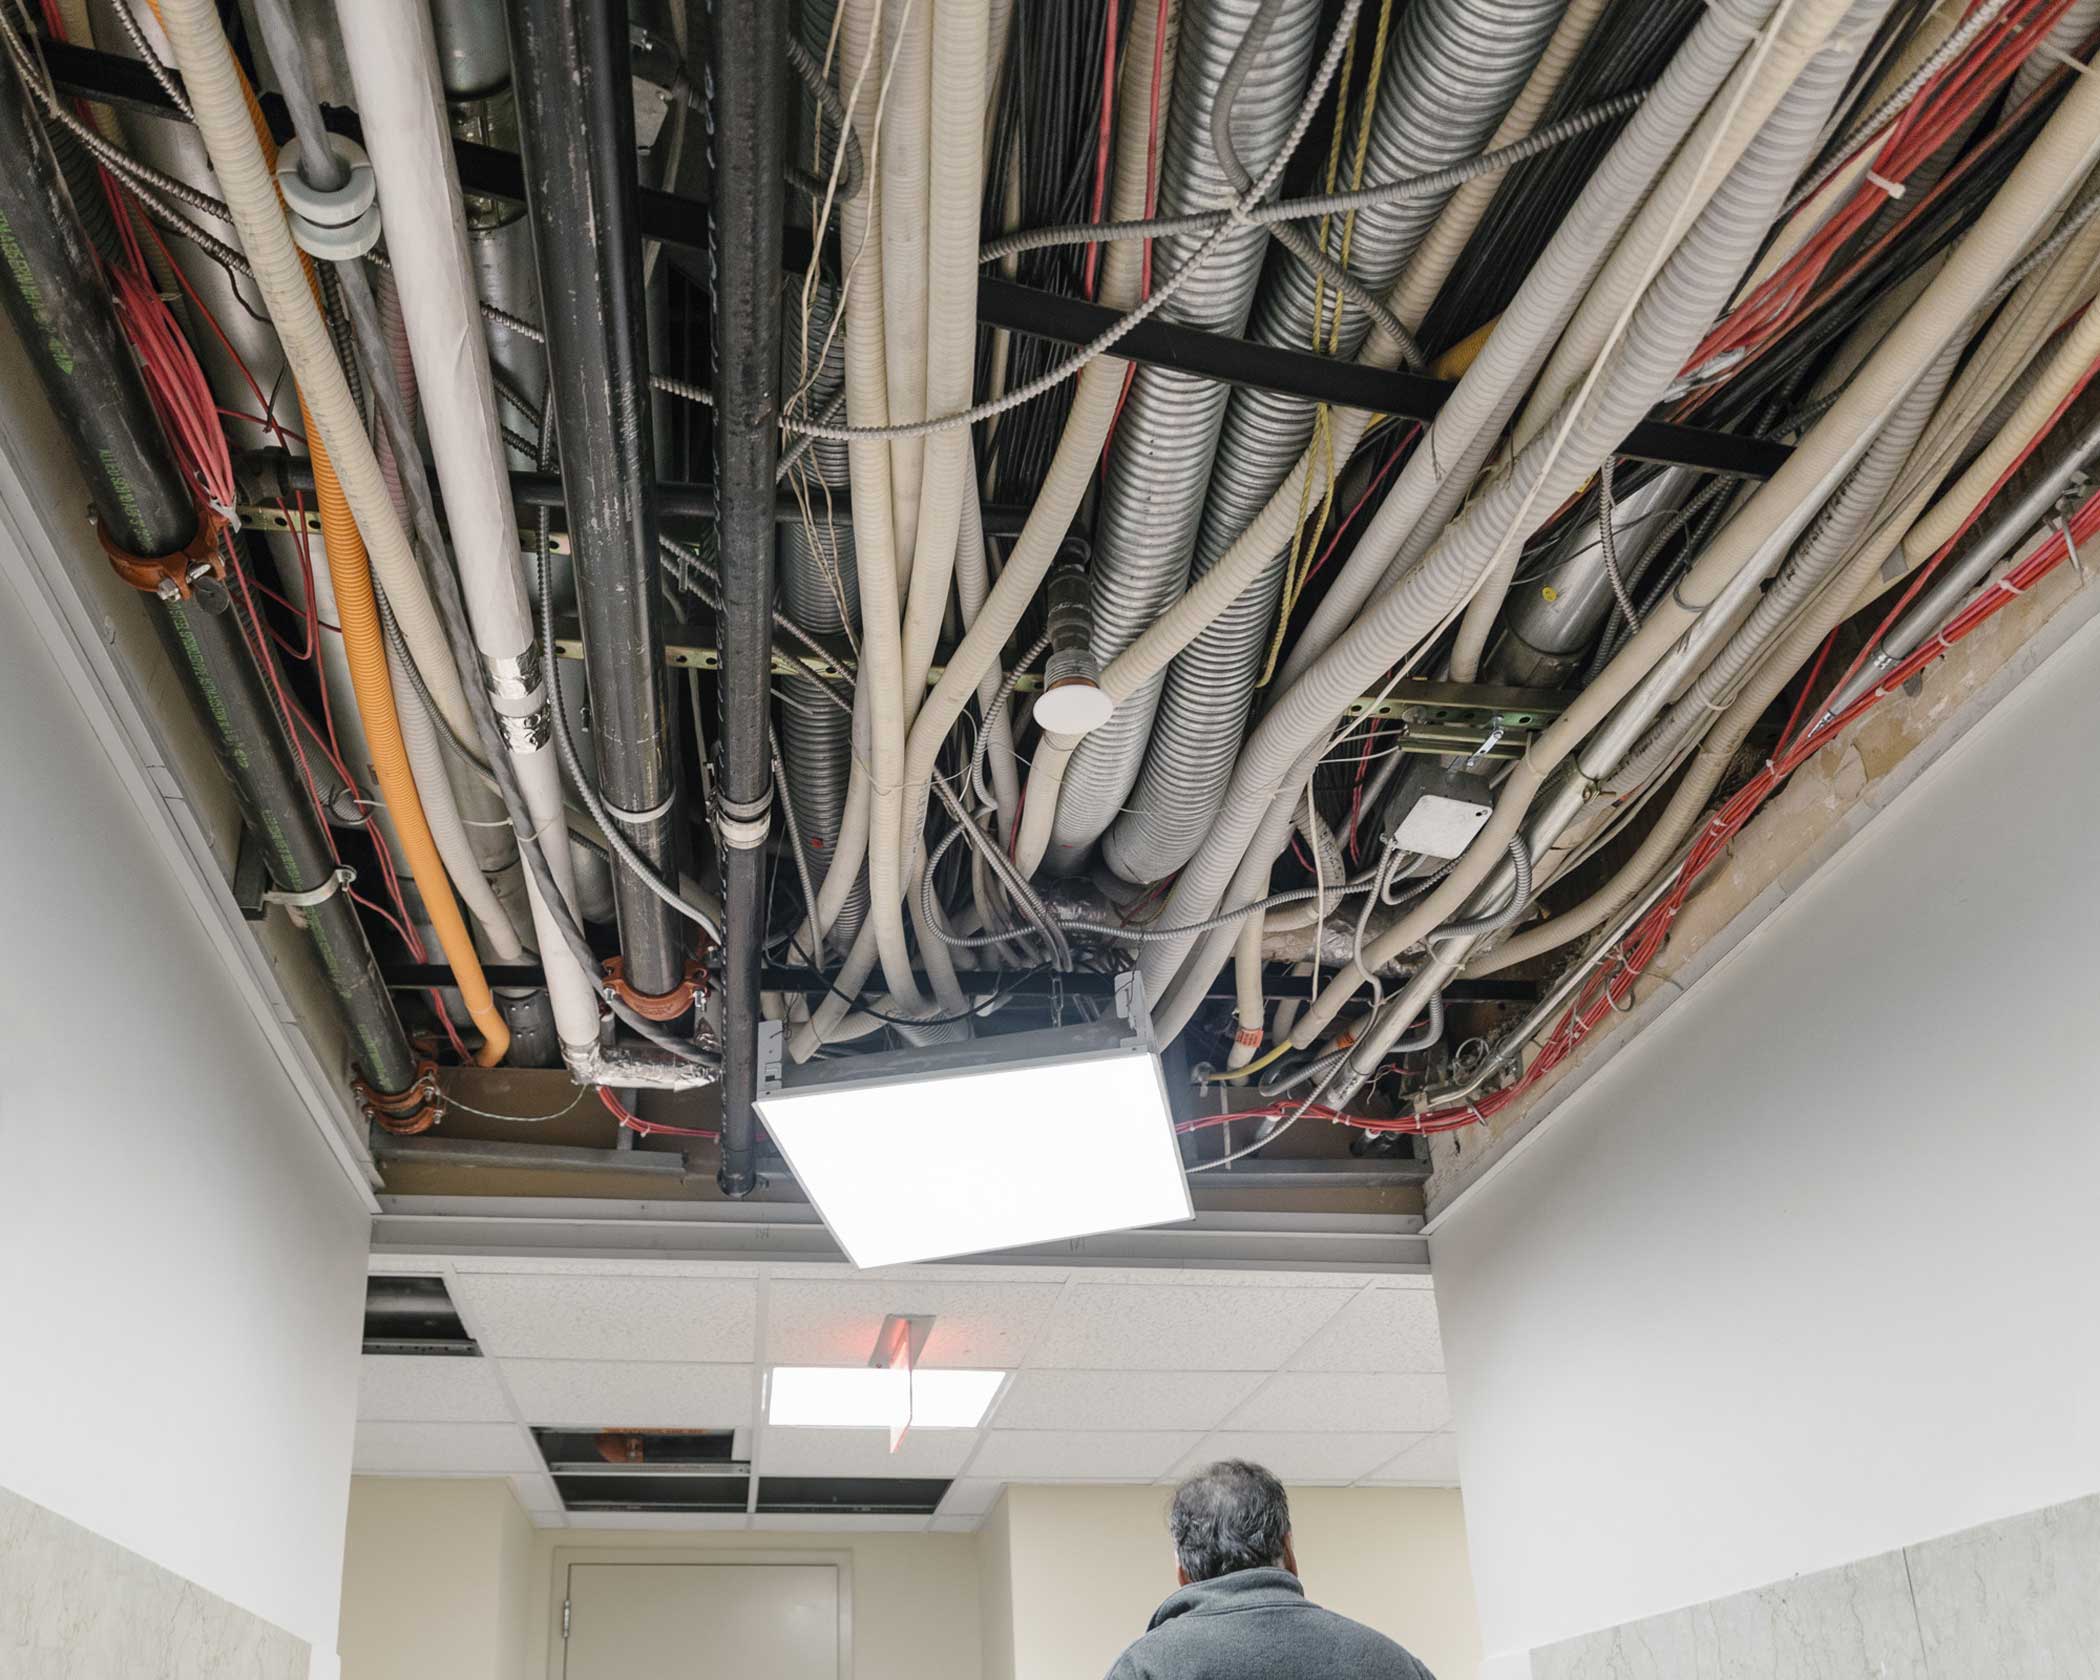 Ceiling tiles removed for maintenance reveal fiber cabling and utility lines.